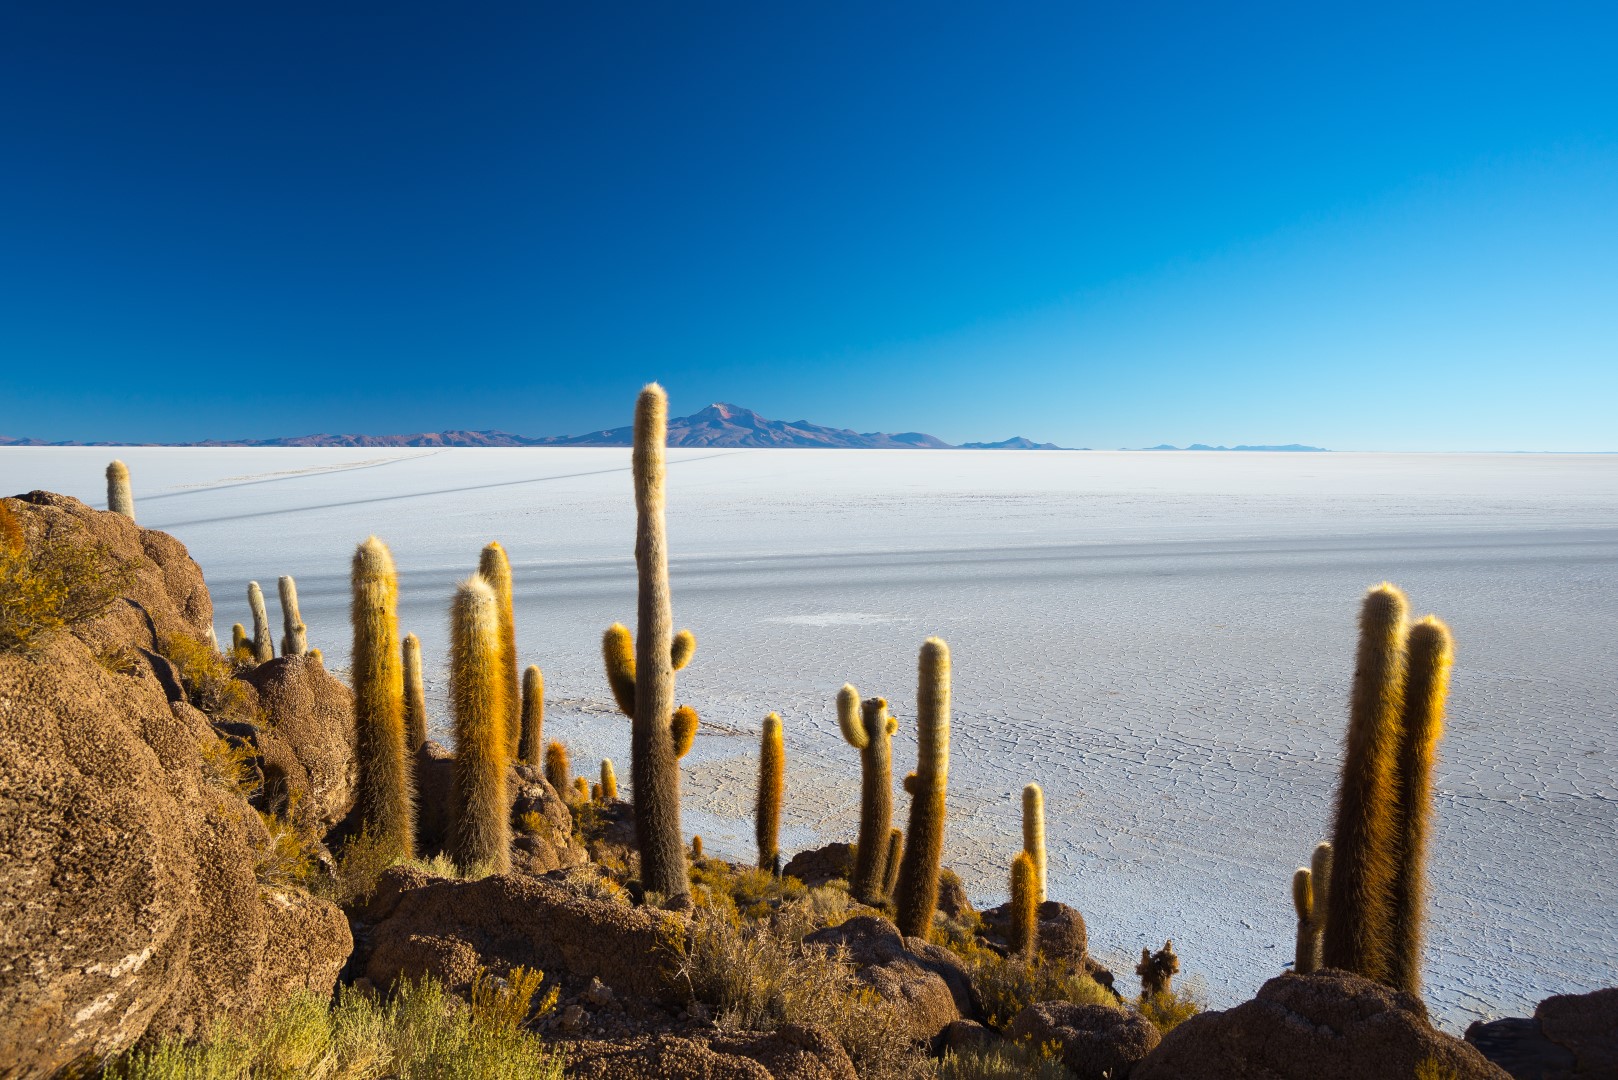 wp-content/uploads/itineraries/Bolivia/Best of Bolivia/day 7 (Large).jpg